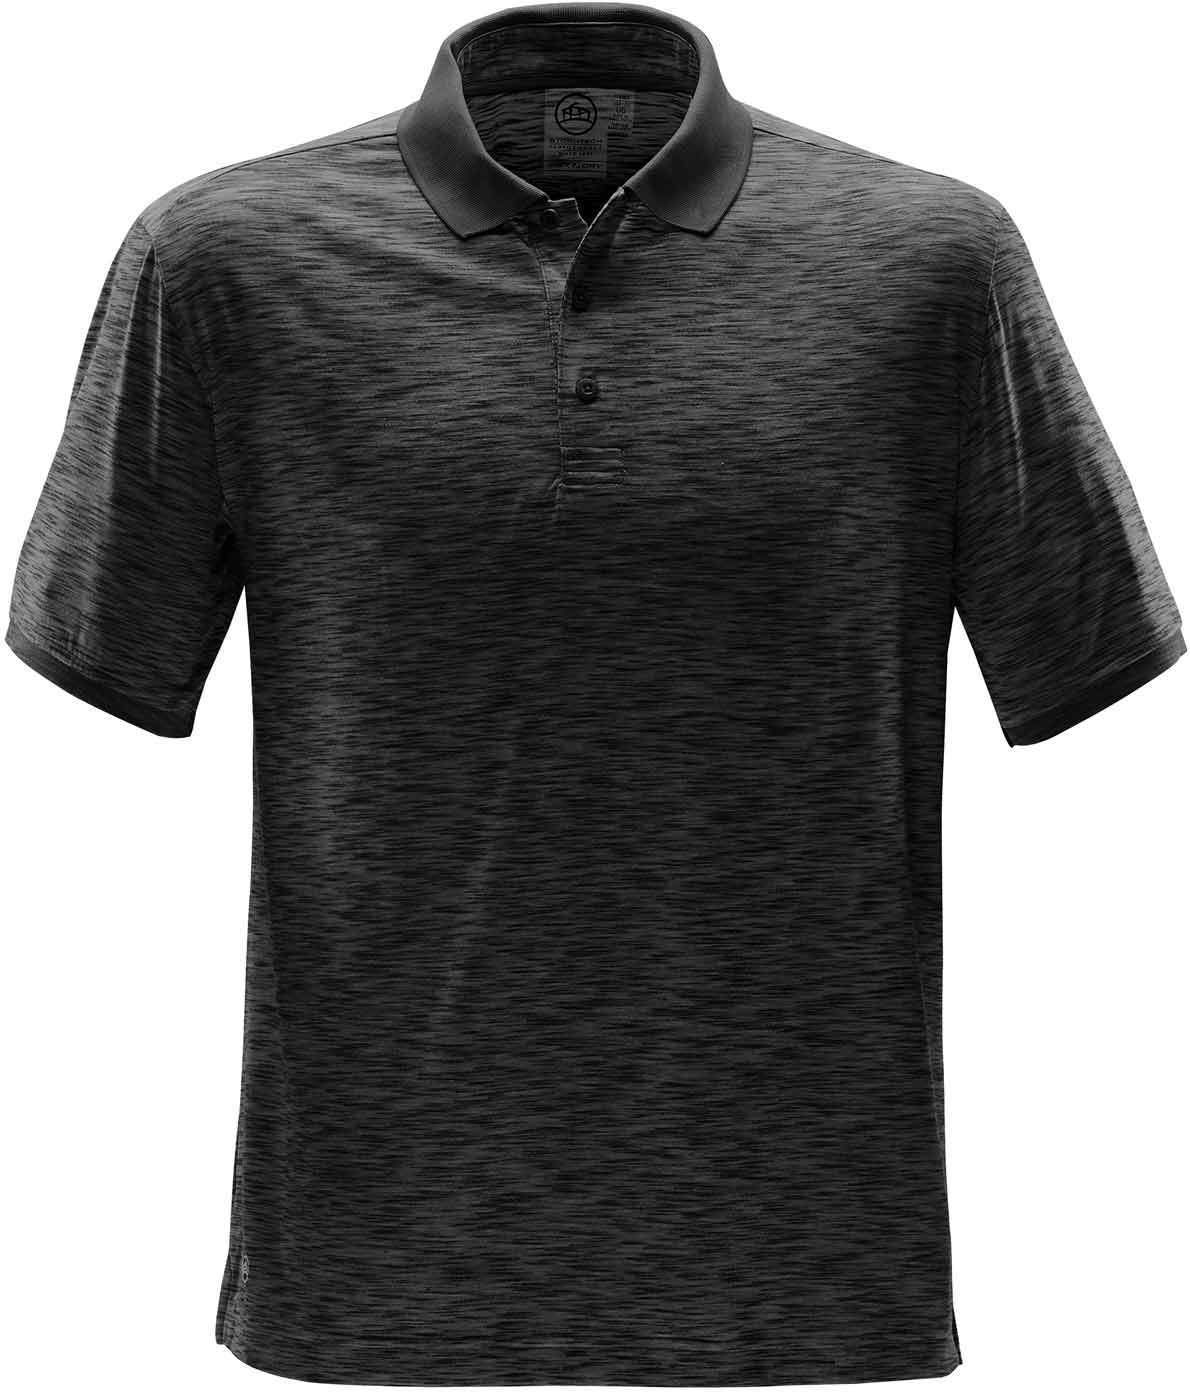 PR-1 Thresher performance polo pour homme